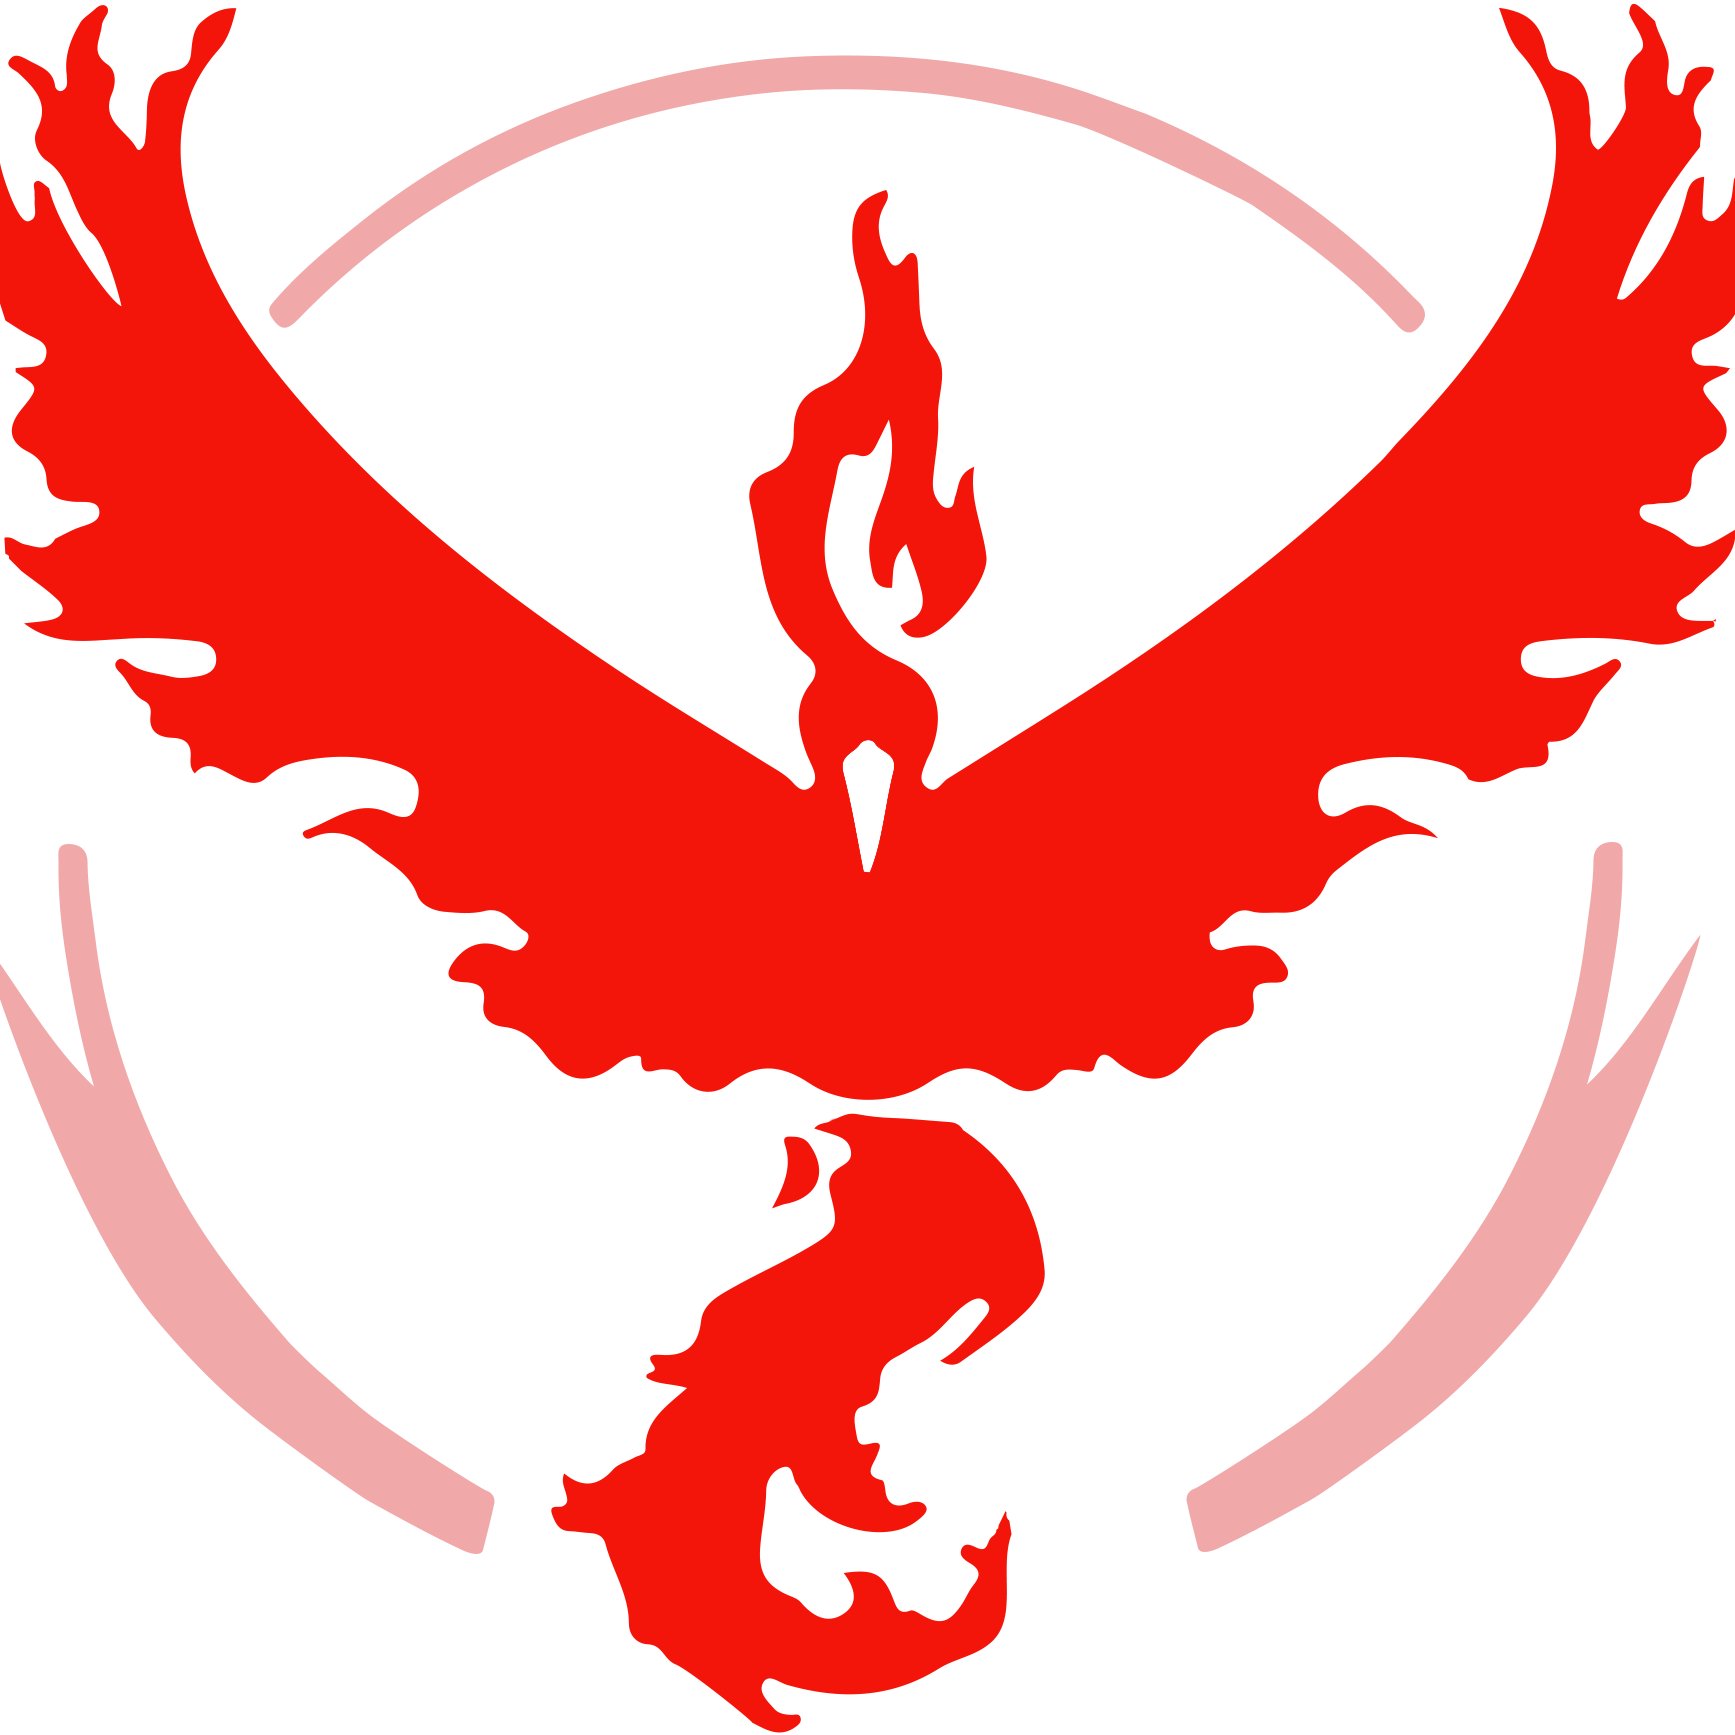 Kenosha's Team Valor for Pokémon Go is setting out to control every gym in the city!